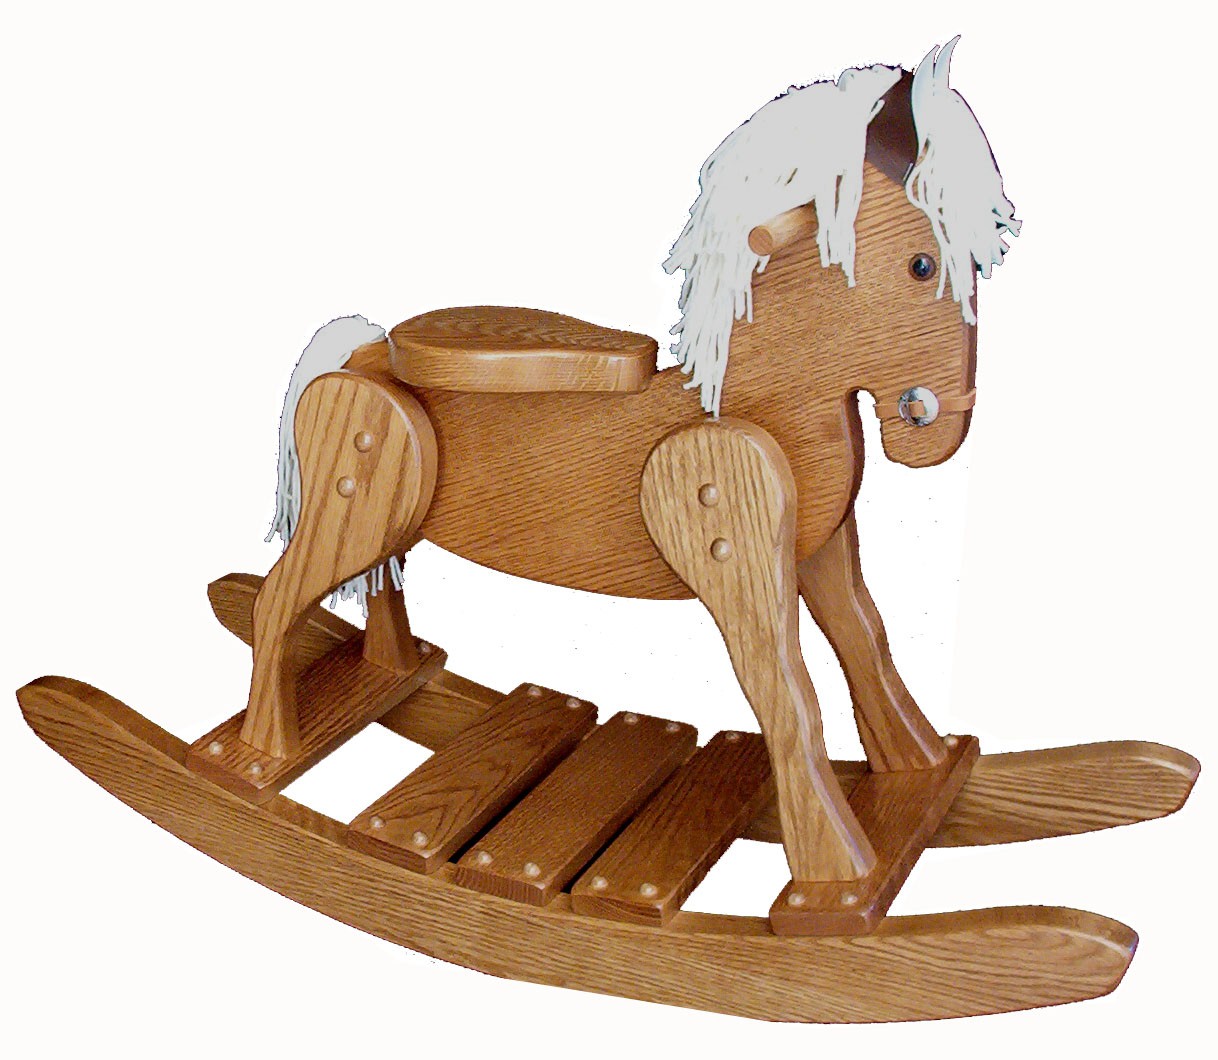 Childs Deluxe Wooden Rocking Horse Amish Built Solid Poplar Painted Wood Toy! 